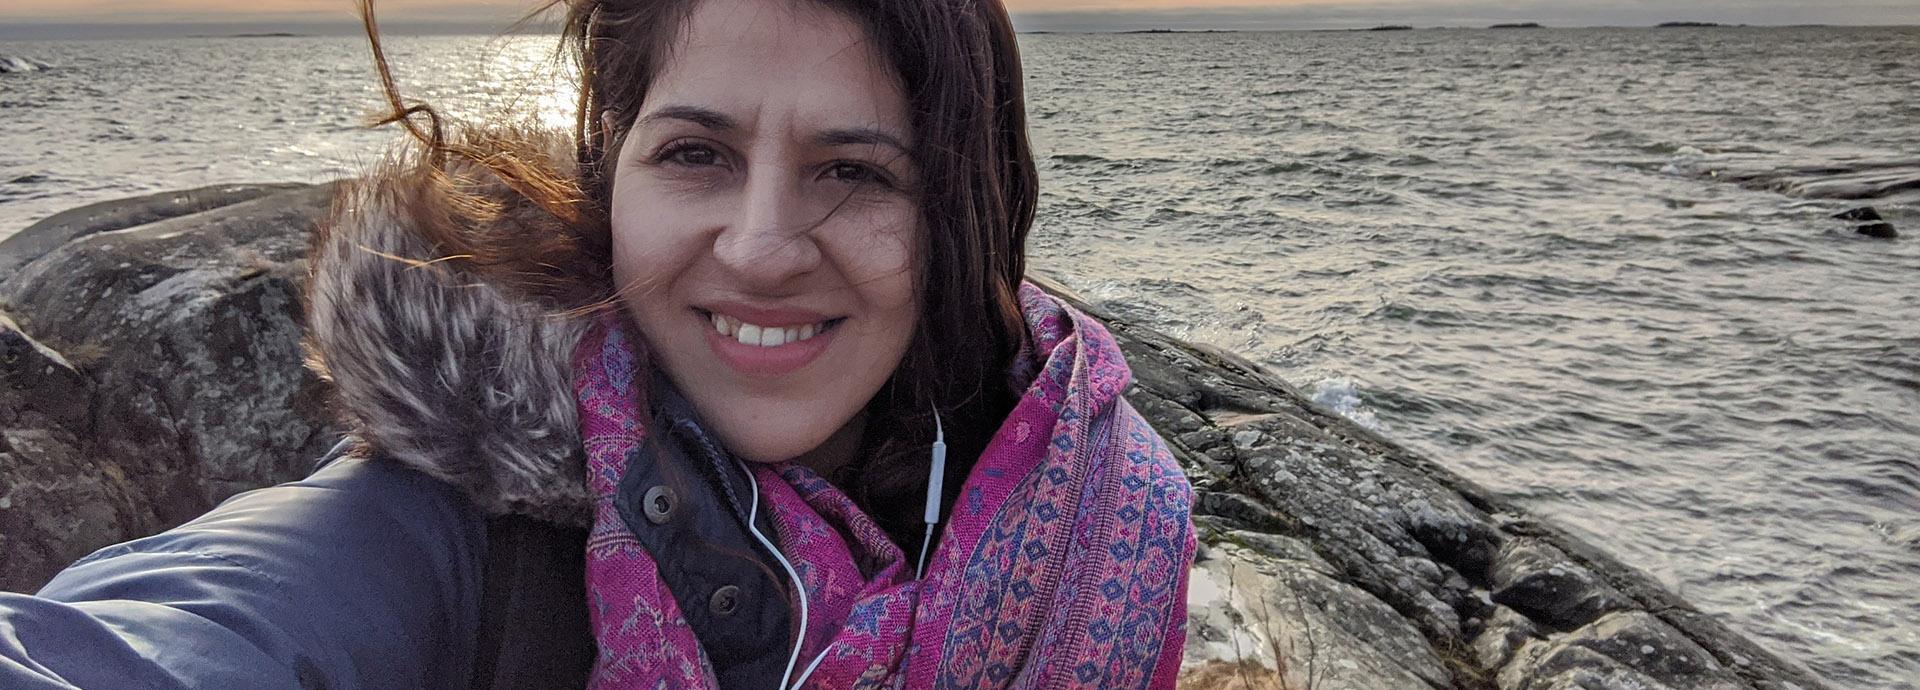 Maedeh Pourrabi on an rocky island, taking a selfie on a windy evening with sea and sunset behind her.